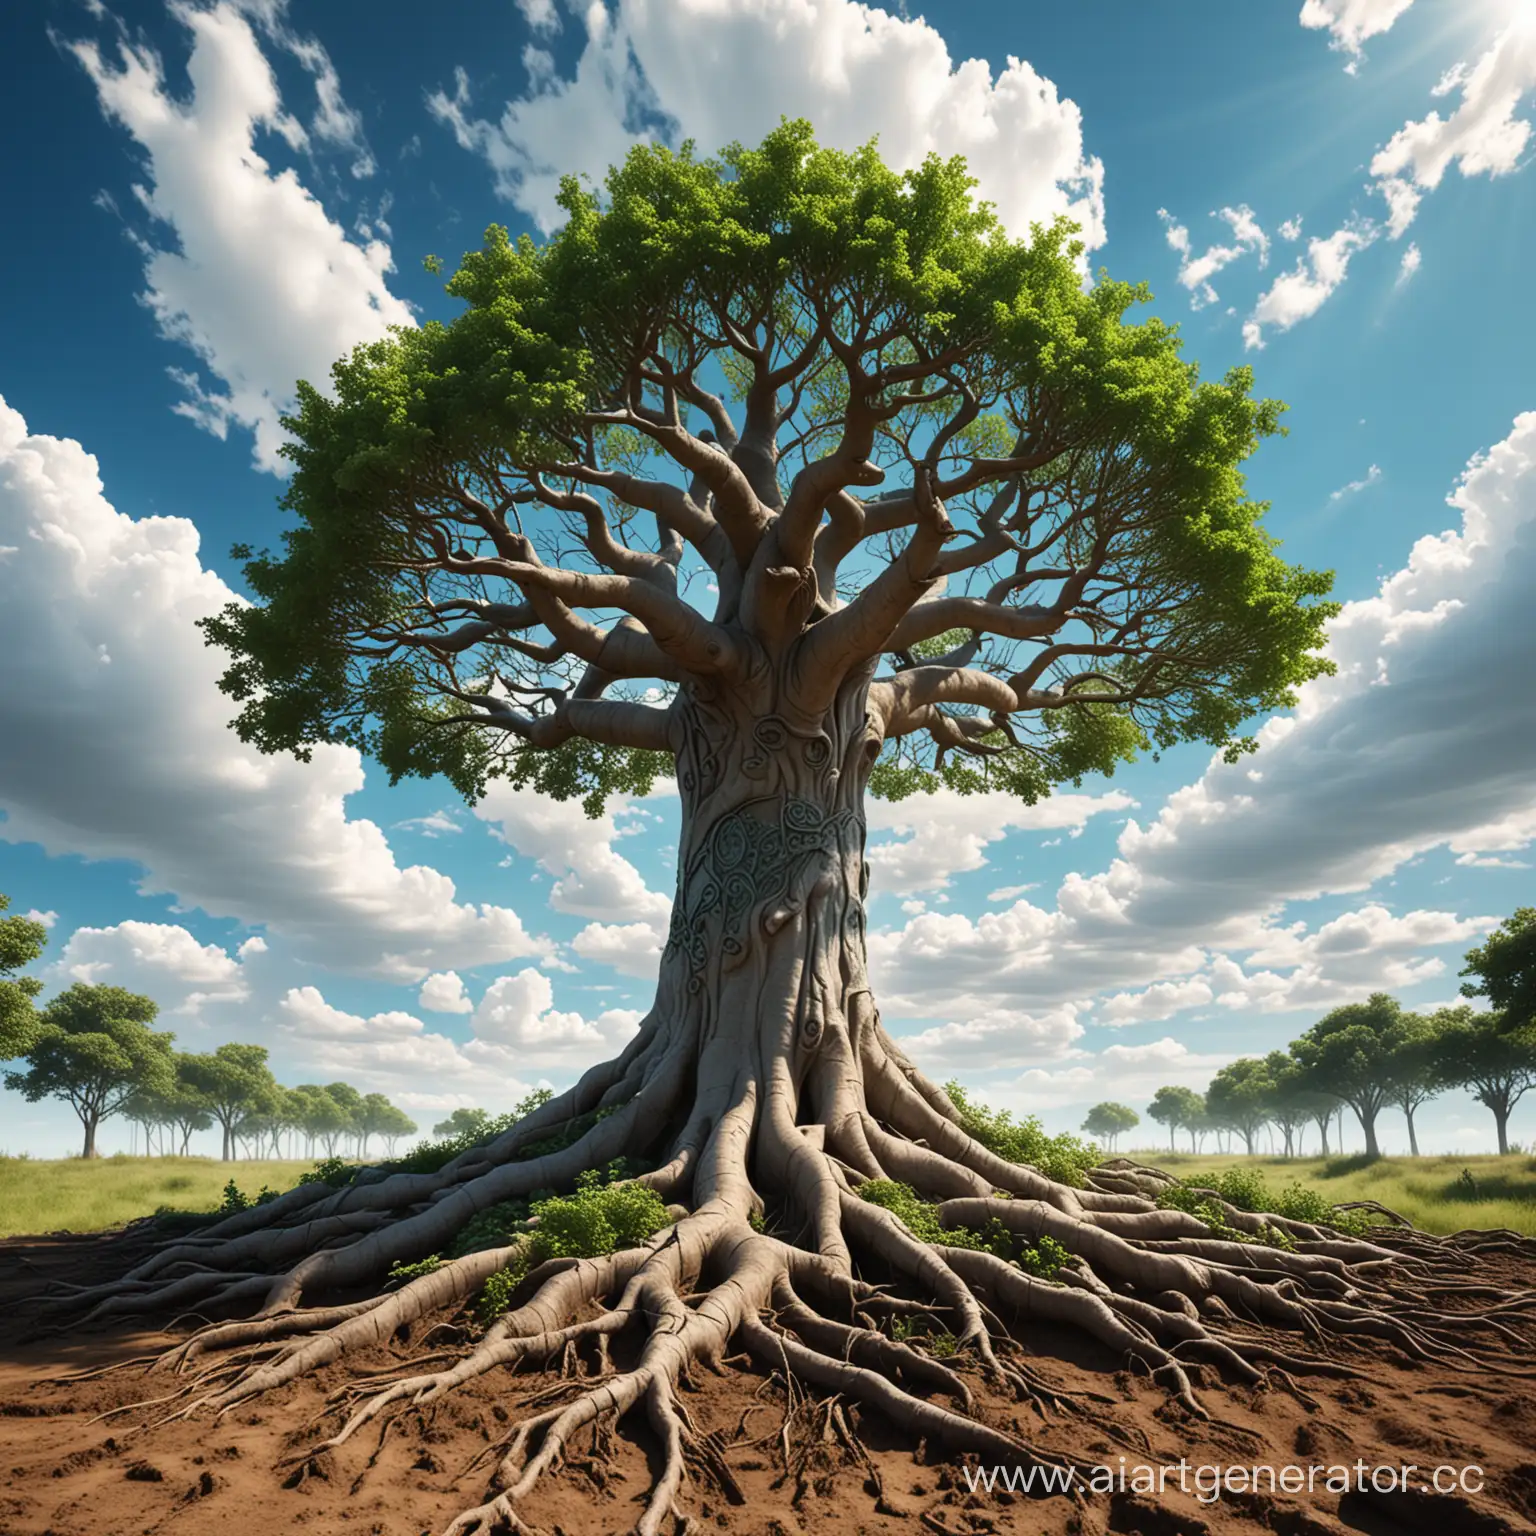 Majestic-Tree-of-Life-Vibrant-Crown-and-Futuristic-Roots-Against-Blue-Sky